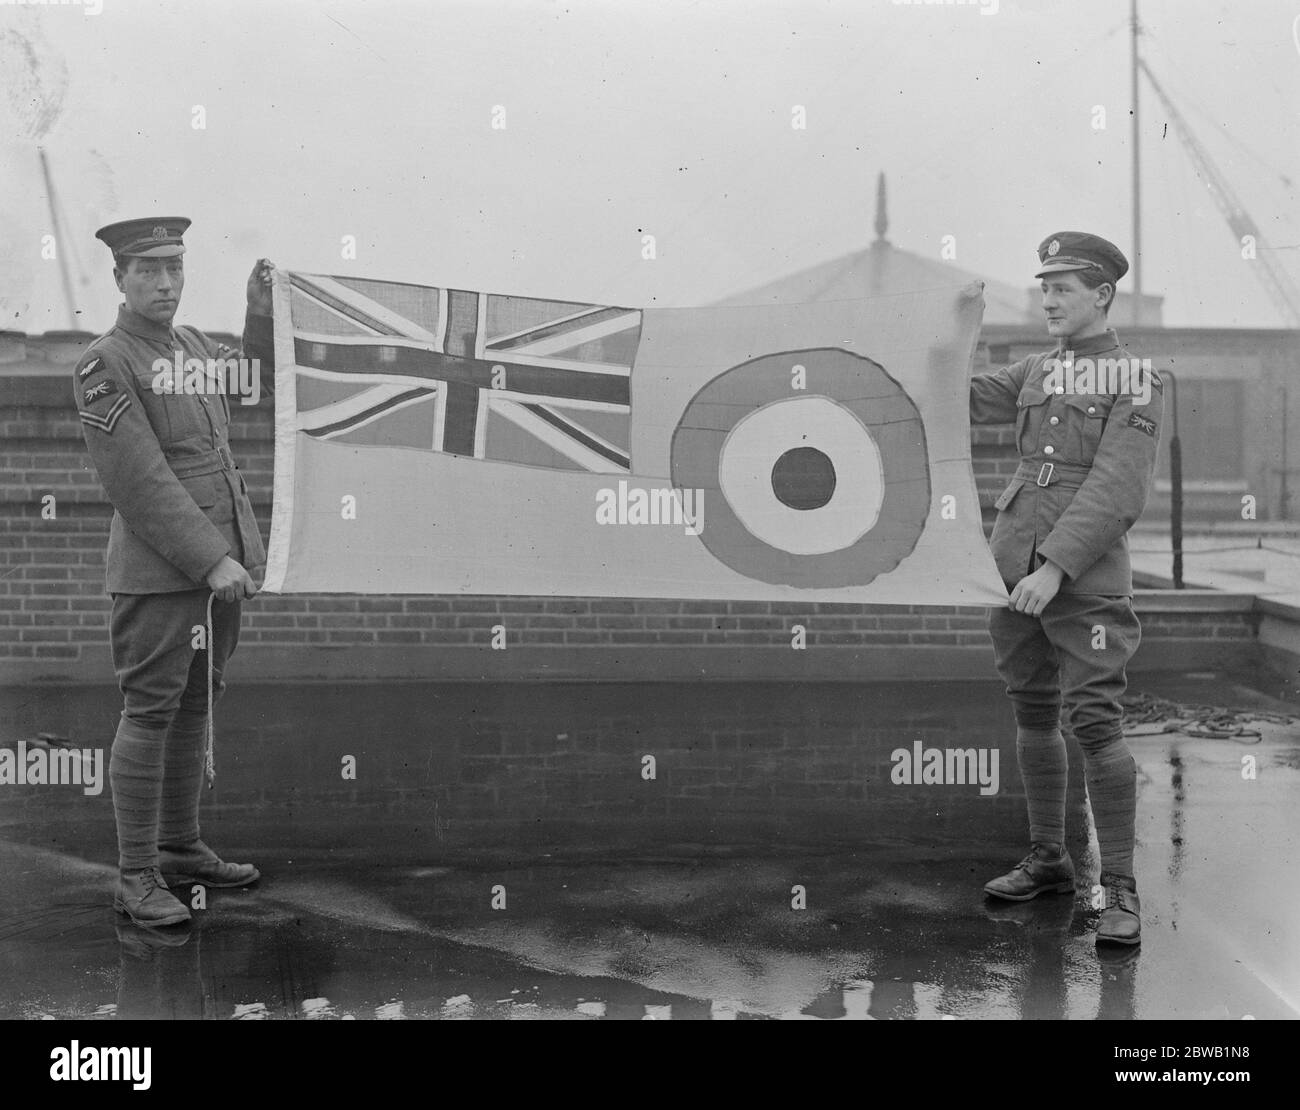 Hoisting the new Royal Air Force ensign . Members of the RAF with the Flag before being hoisted at the Air Ministry . 5 January 1921 Stock Photo